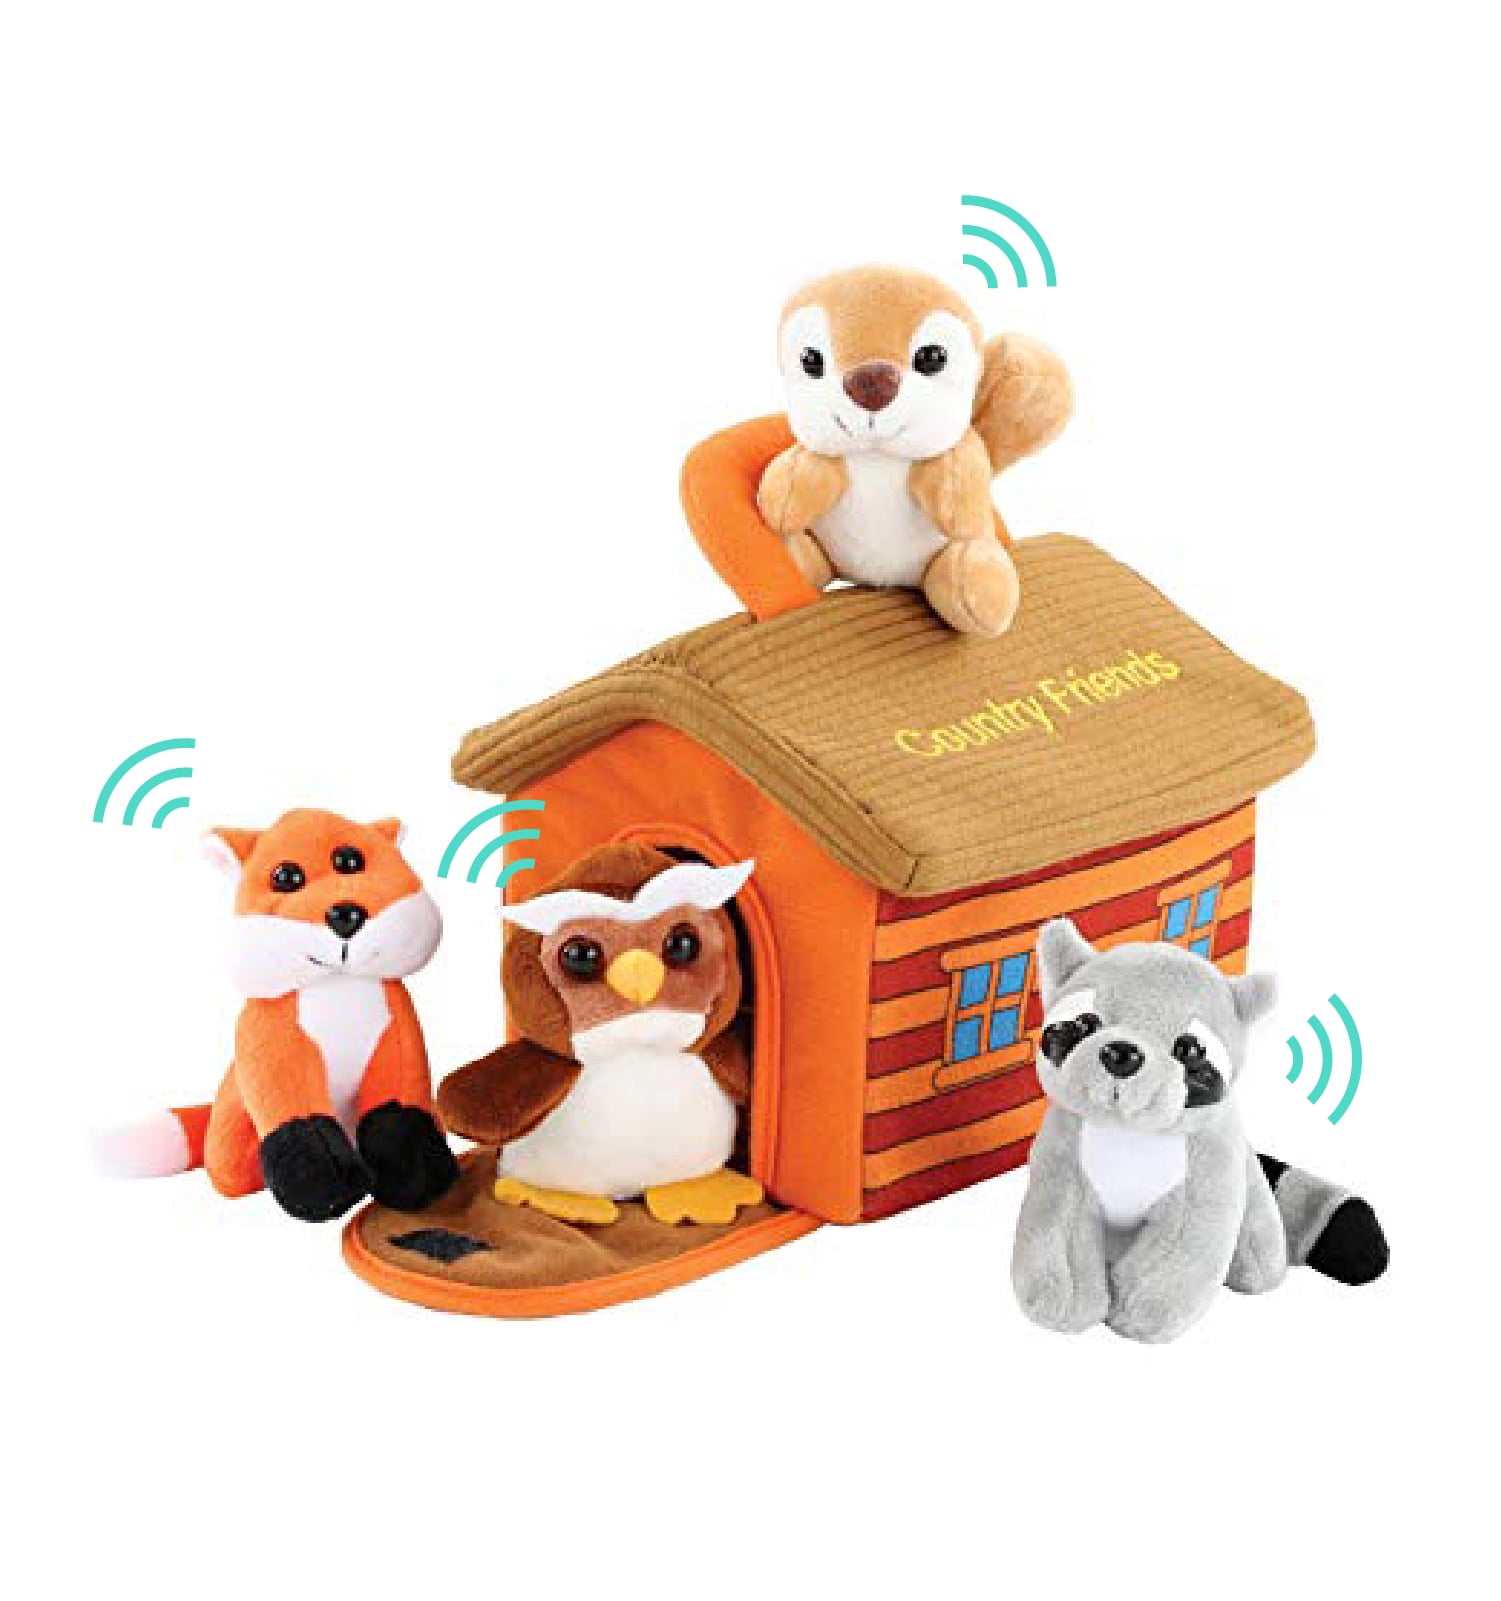 Details about   Animal House Noah's Ark Plush Sound Toy With Carrier Stuffed Animal Gift Playset 